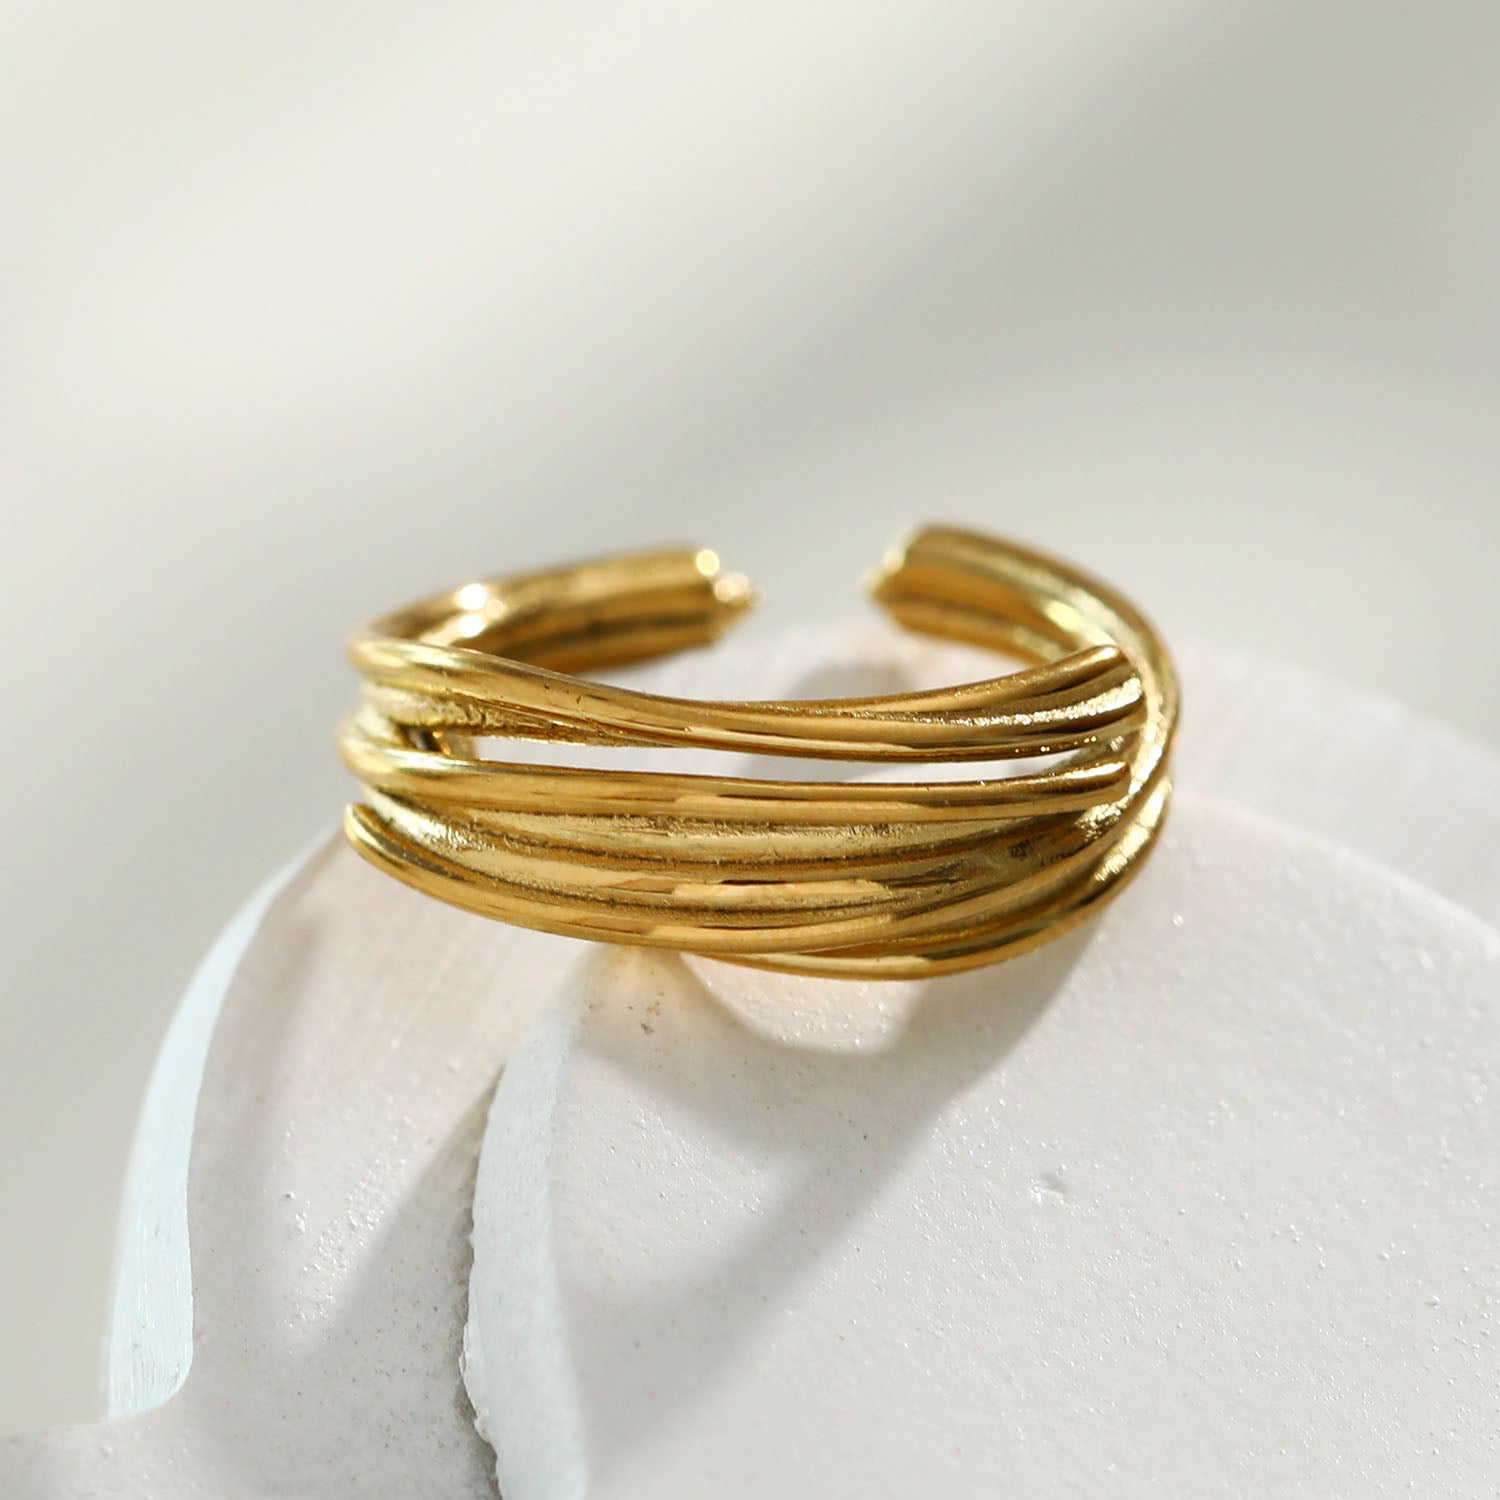 stacked-ring | abstract-design-ring | modern-ring | fashion-ring | hackney-nine | hackneynine | necklace | hoops | bracelets | earrings | charms | studs_earrings | jewellery | jewellery-store | shop-jewelry | gold-jewellery | silver-jewellery | dressy_jewellery | classy_ jewellery | on_trend_jewellery | fashion_ jewellery | cool_jewellery | affordable_jewellery | designer_jewellery | vintage_jeweler | gifts-for-her | gifts-for-mum | gifts-for-girls | gifts-for-females | dainty-jewellery | bridesmaid-gift |